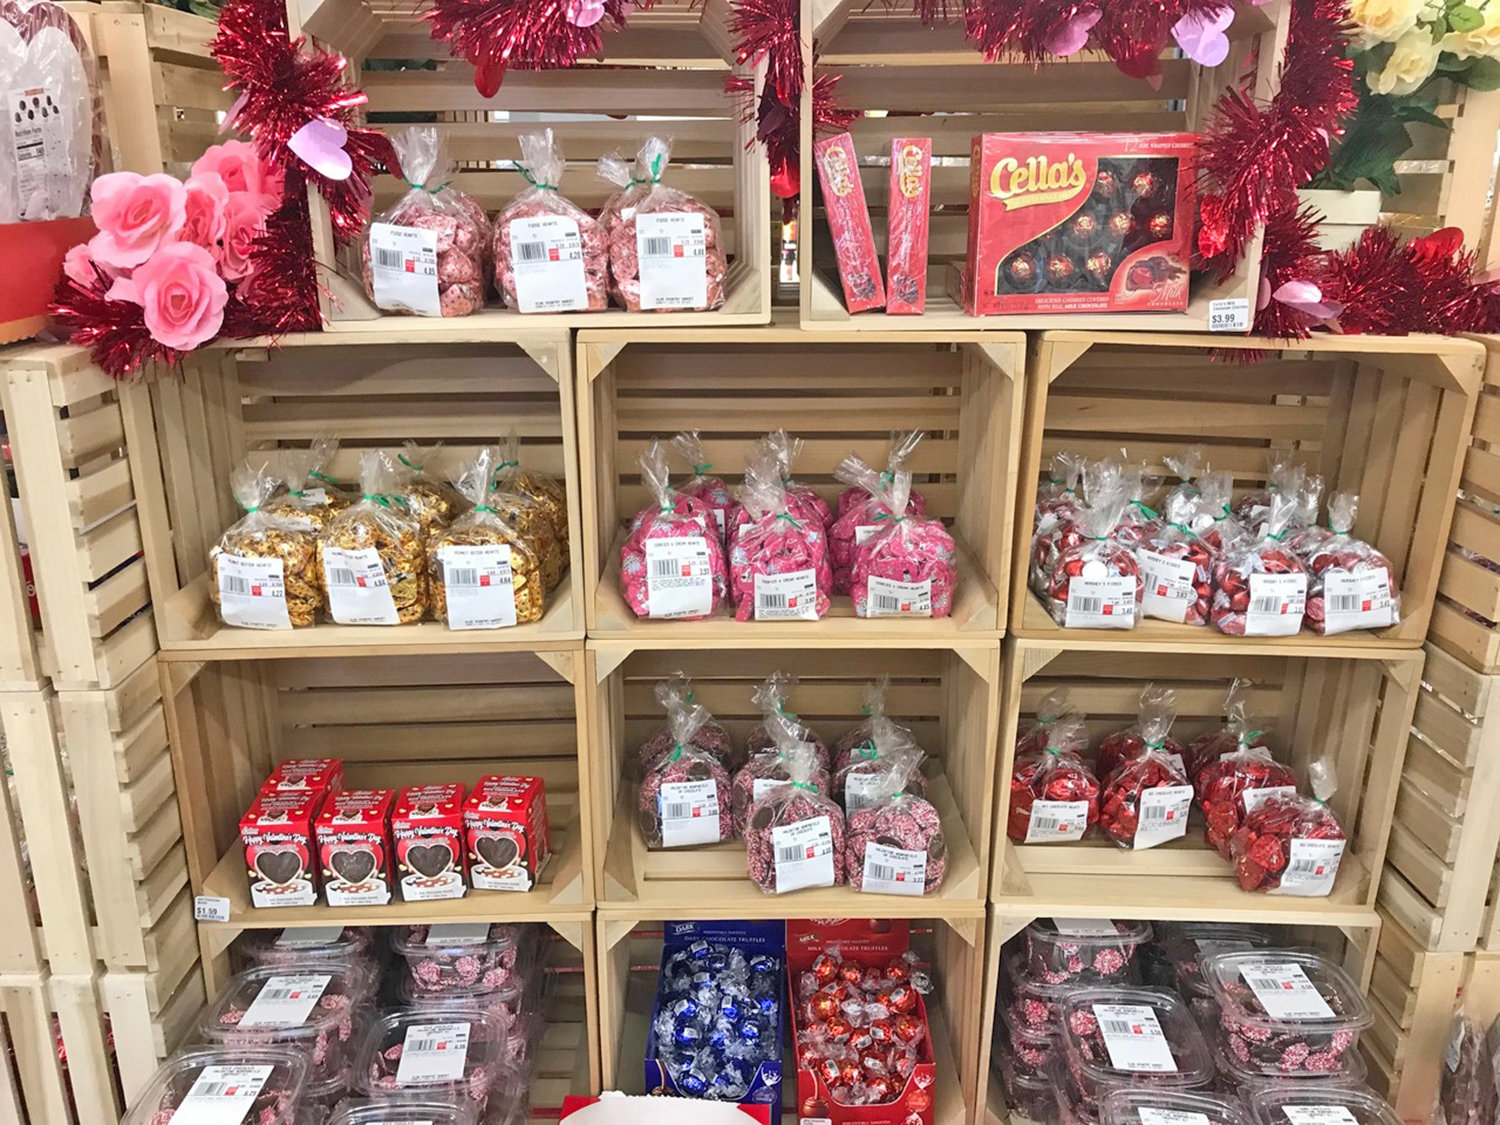 Special seasonal displays, like this Valentine's Day assortment of treats, are ever-changing at Olde Kountry Market in Vernon.